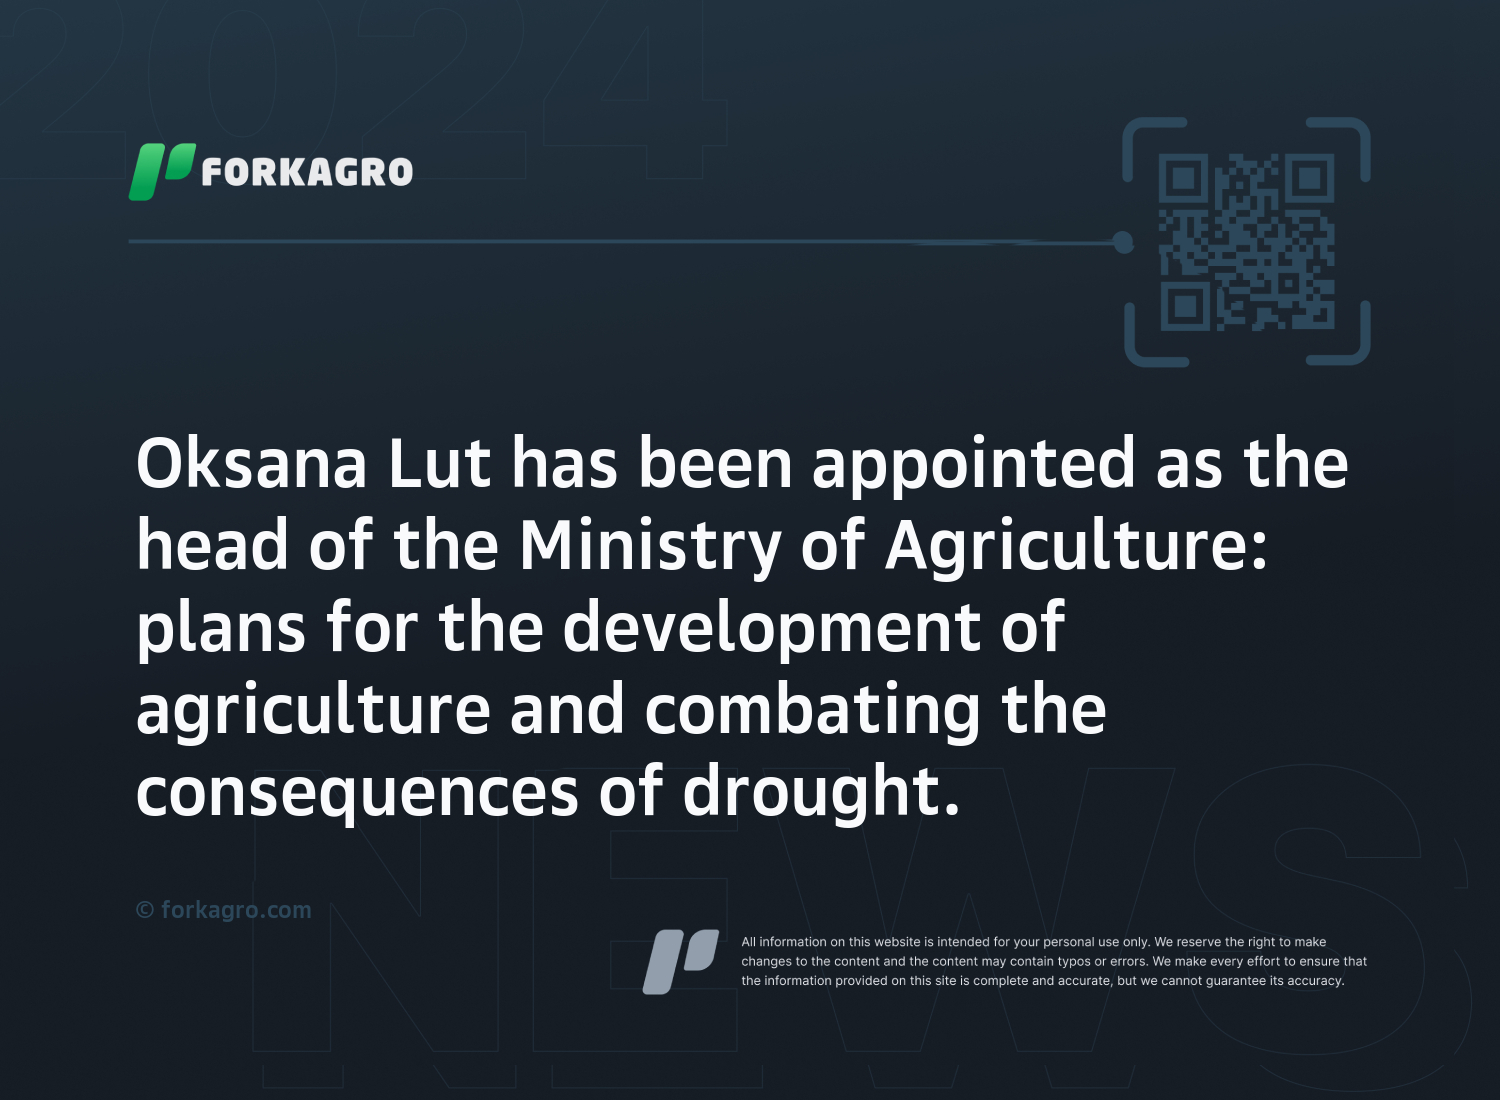 Oksana Lut has been appointed as the head of the Ministry of Agriculture: plans for the development of agriculture and combating the consequences of drought.